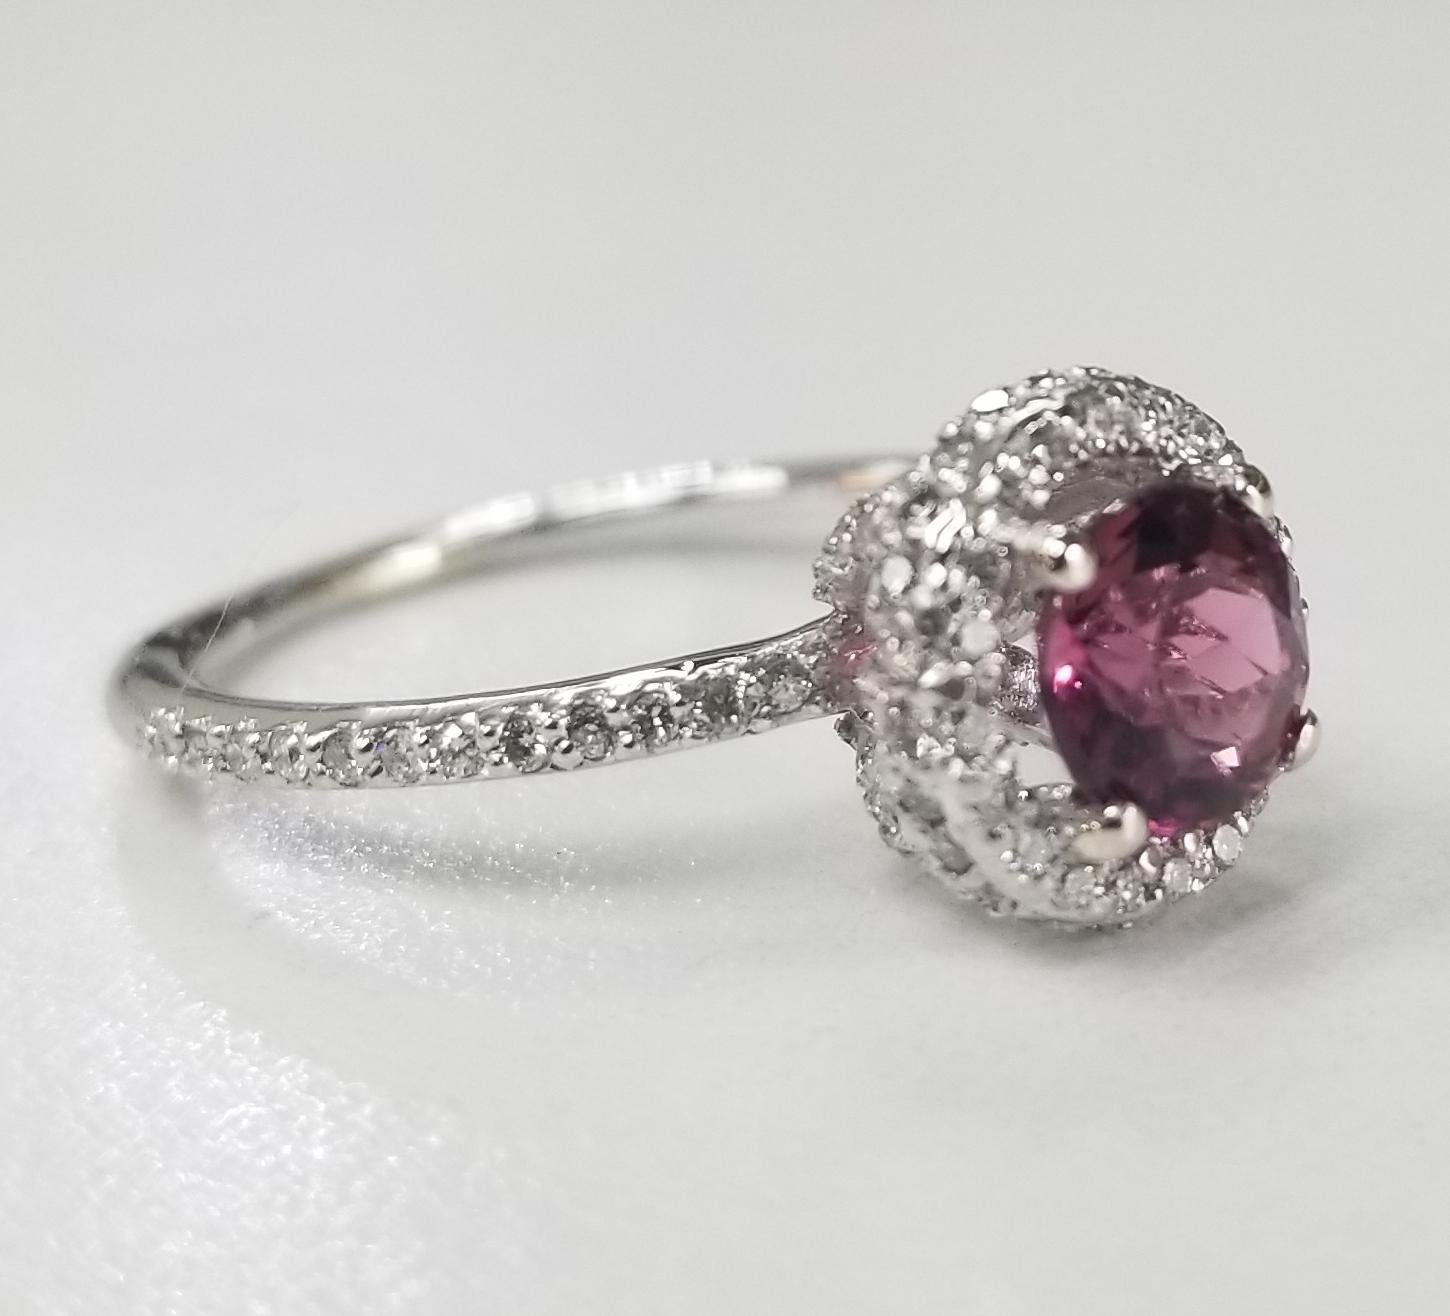 14 karat white gold Pink Tourmaline diamond halo ring, containing 1 round pink tourmaline of gem quality weighing .90pts.  Diamonds are set all over the setting.  This ring is a size 6.5 but we will size to fit for free.